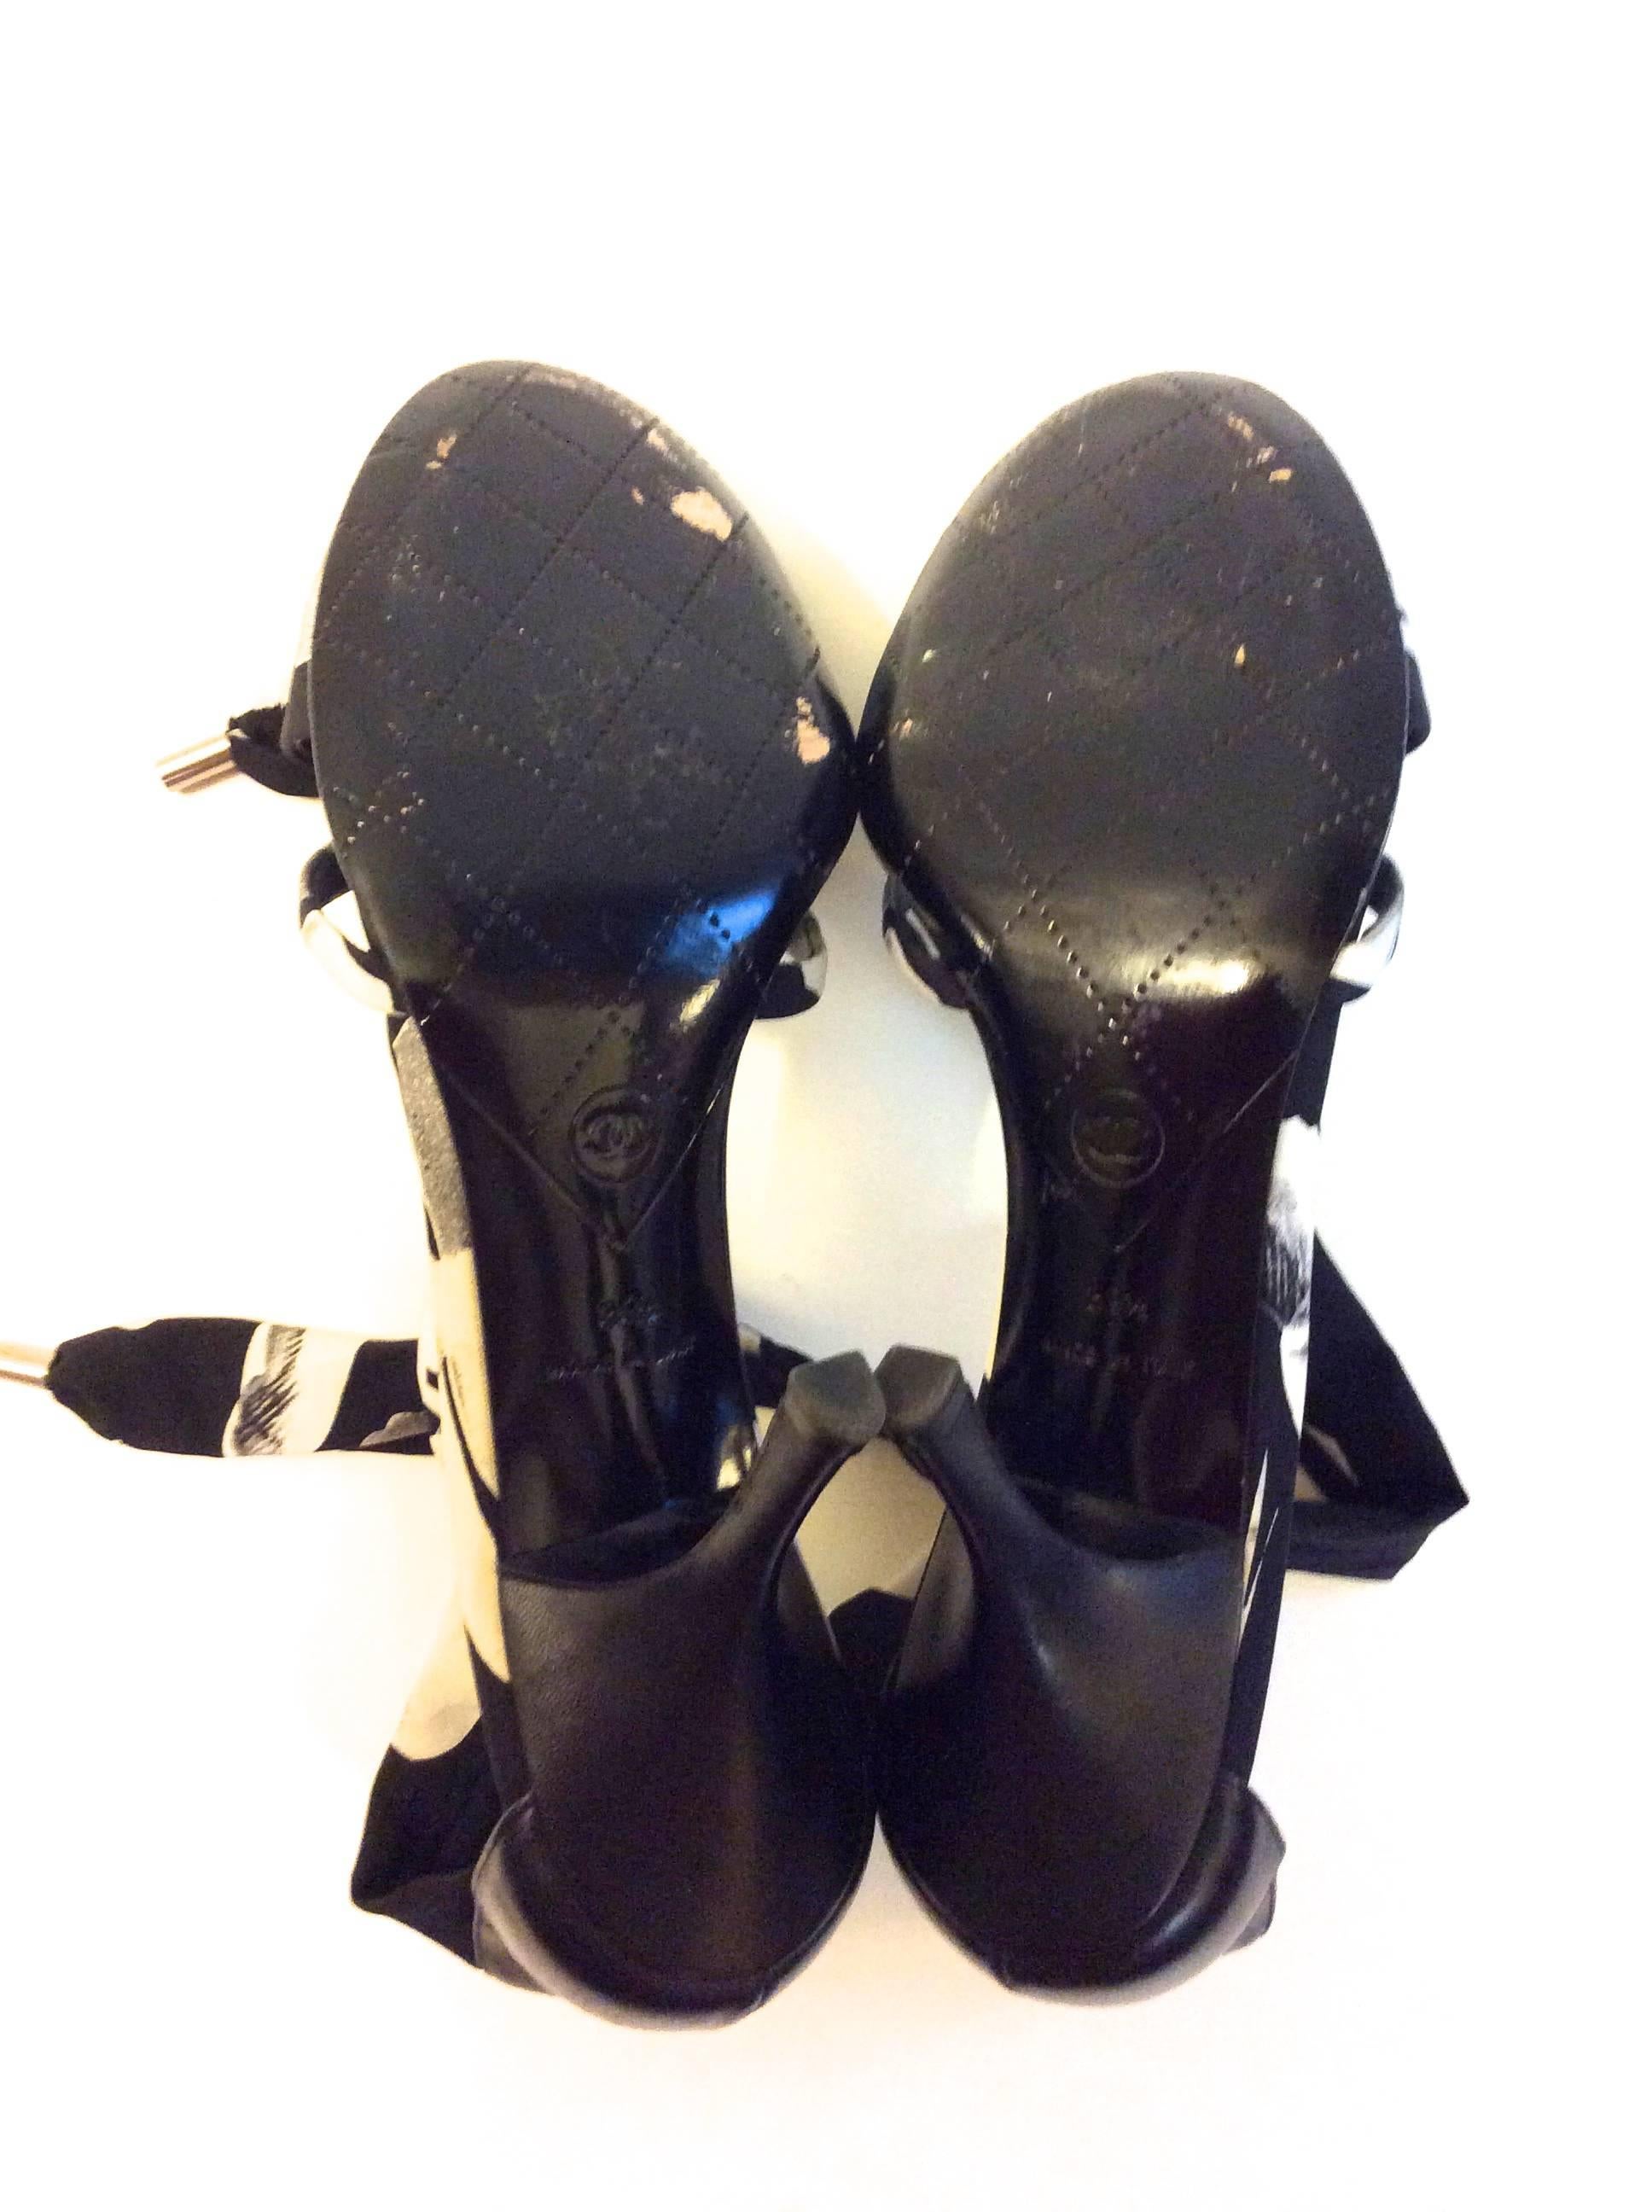 Chanel Heels - Size 39.5 - Black Leather w/ Silk For Sale 3